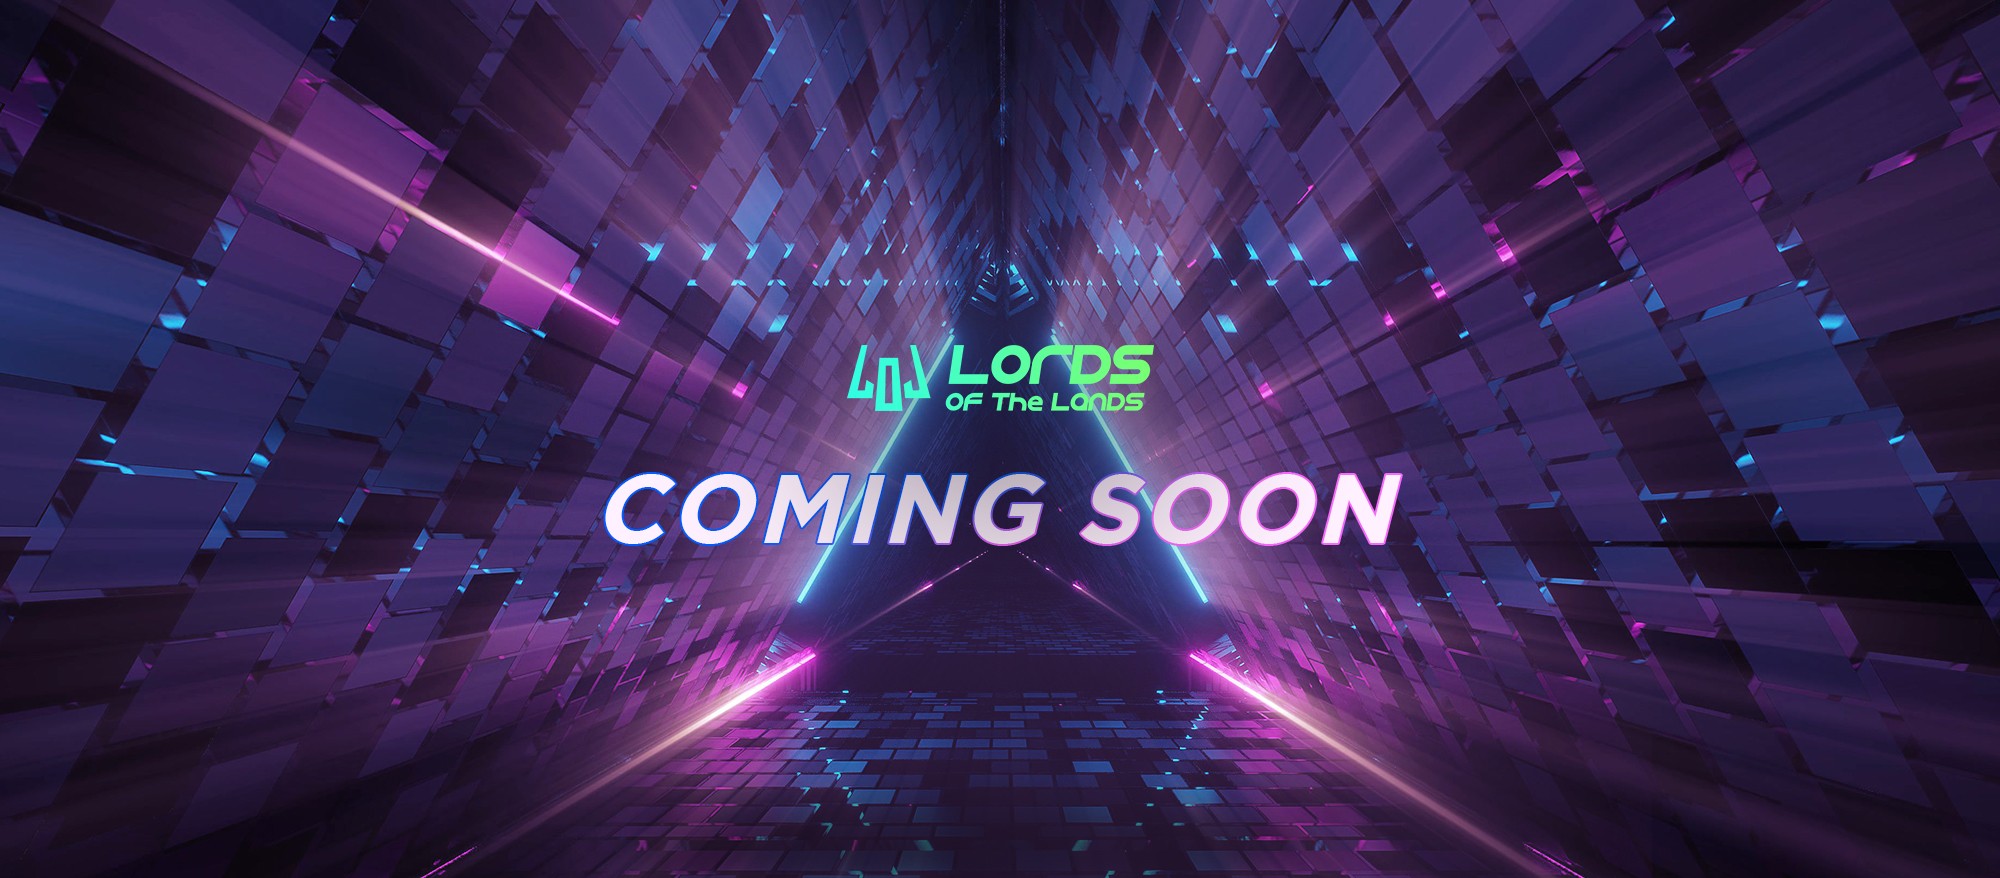 Lords of the Lands Metaverse to Unveil its First NFT Presale